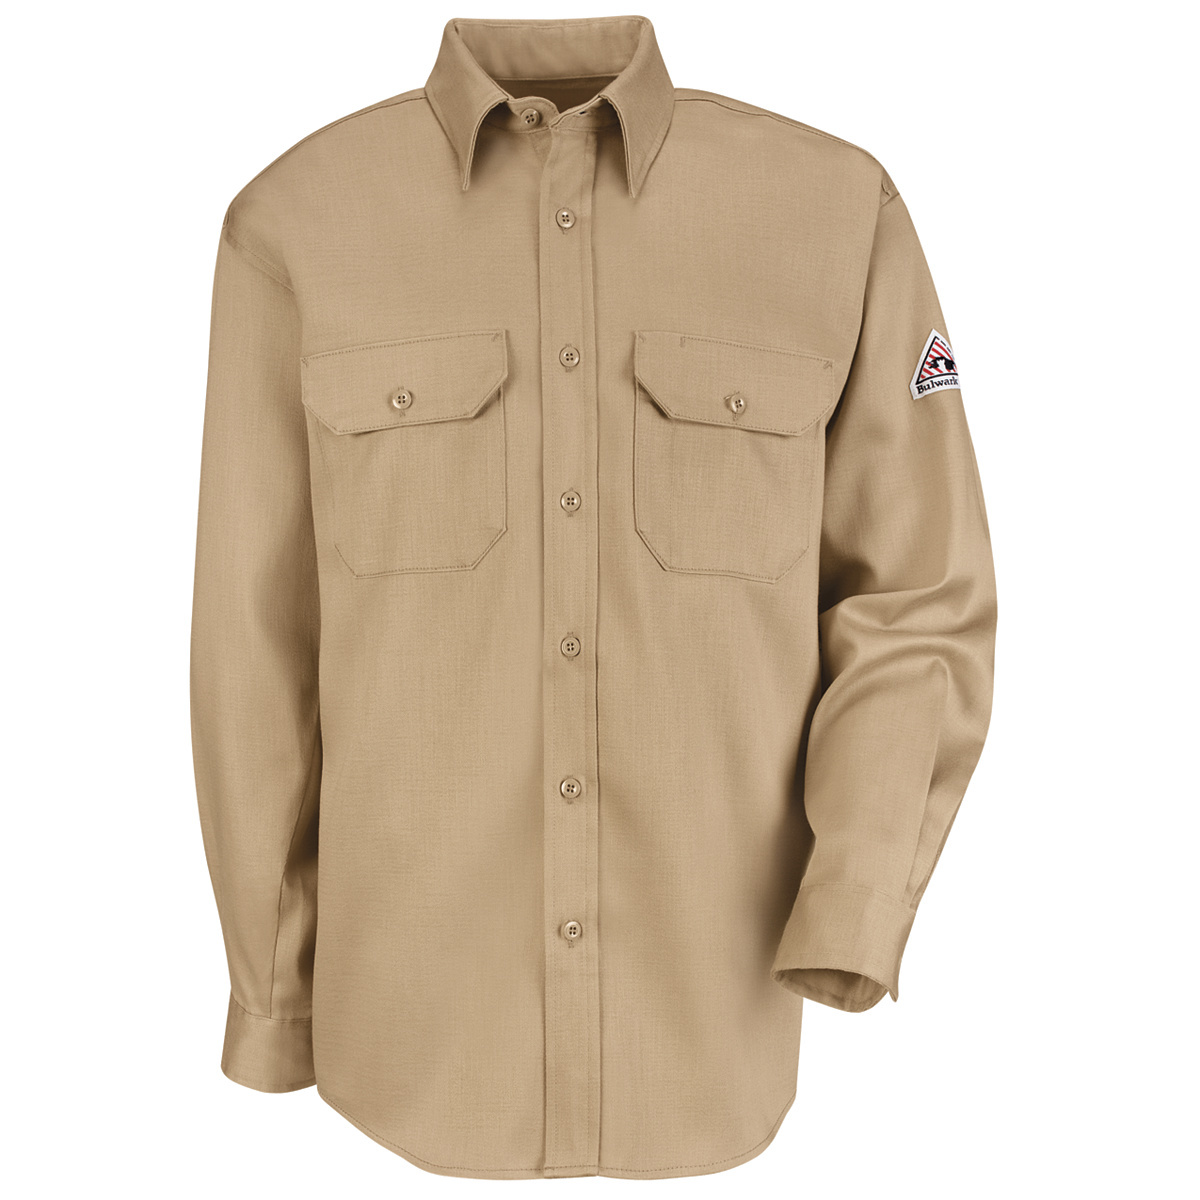 Bulwark® 3X Tall Khaki EXCEL FR® ComforTouch® Flame Resistant Uniform Shirt With Button Front Closure